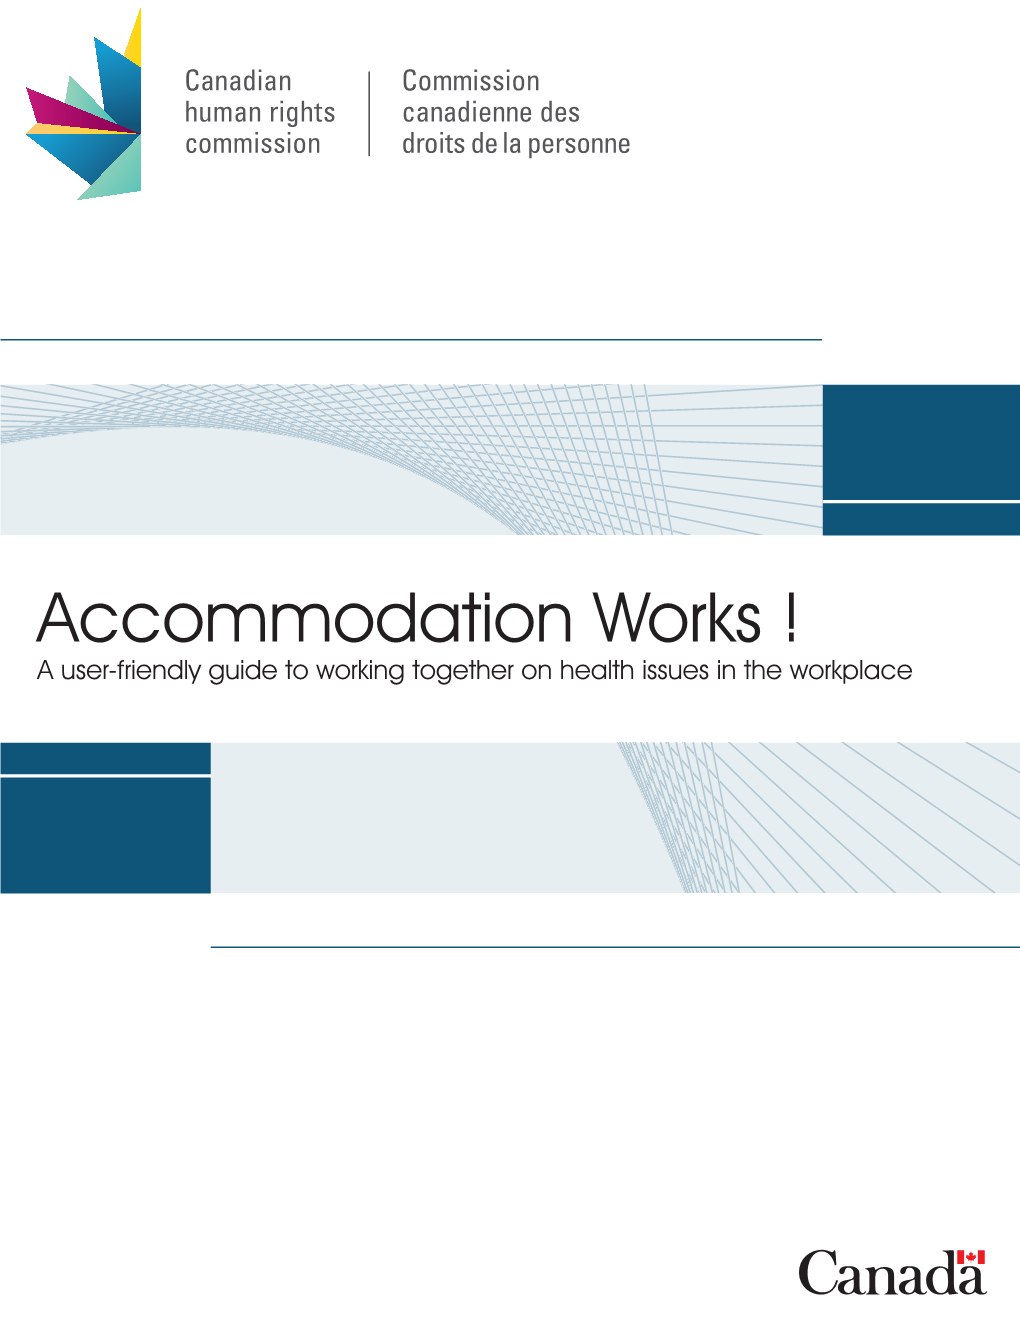 Accommodation Works!" Web-Based Application Helps Everyone See the Process from the Other's Perspective